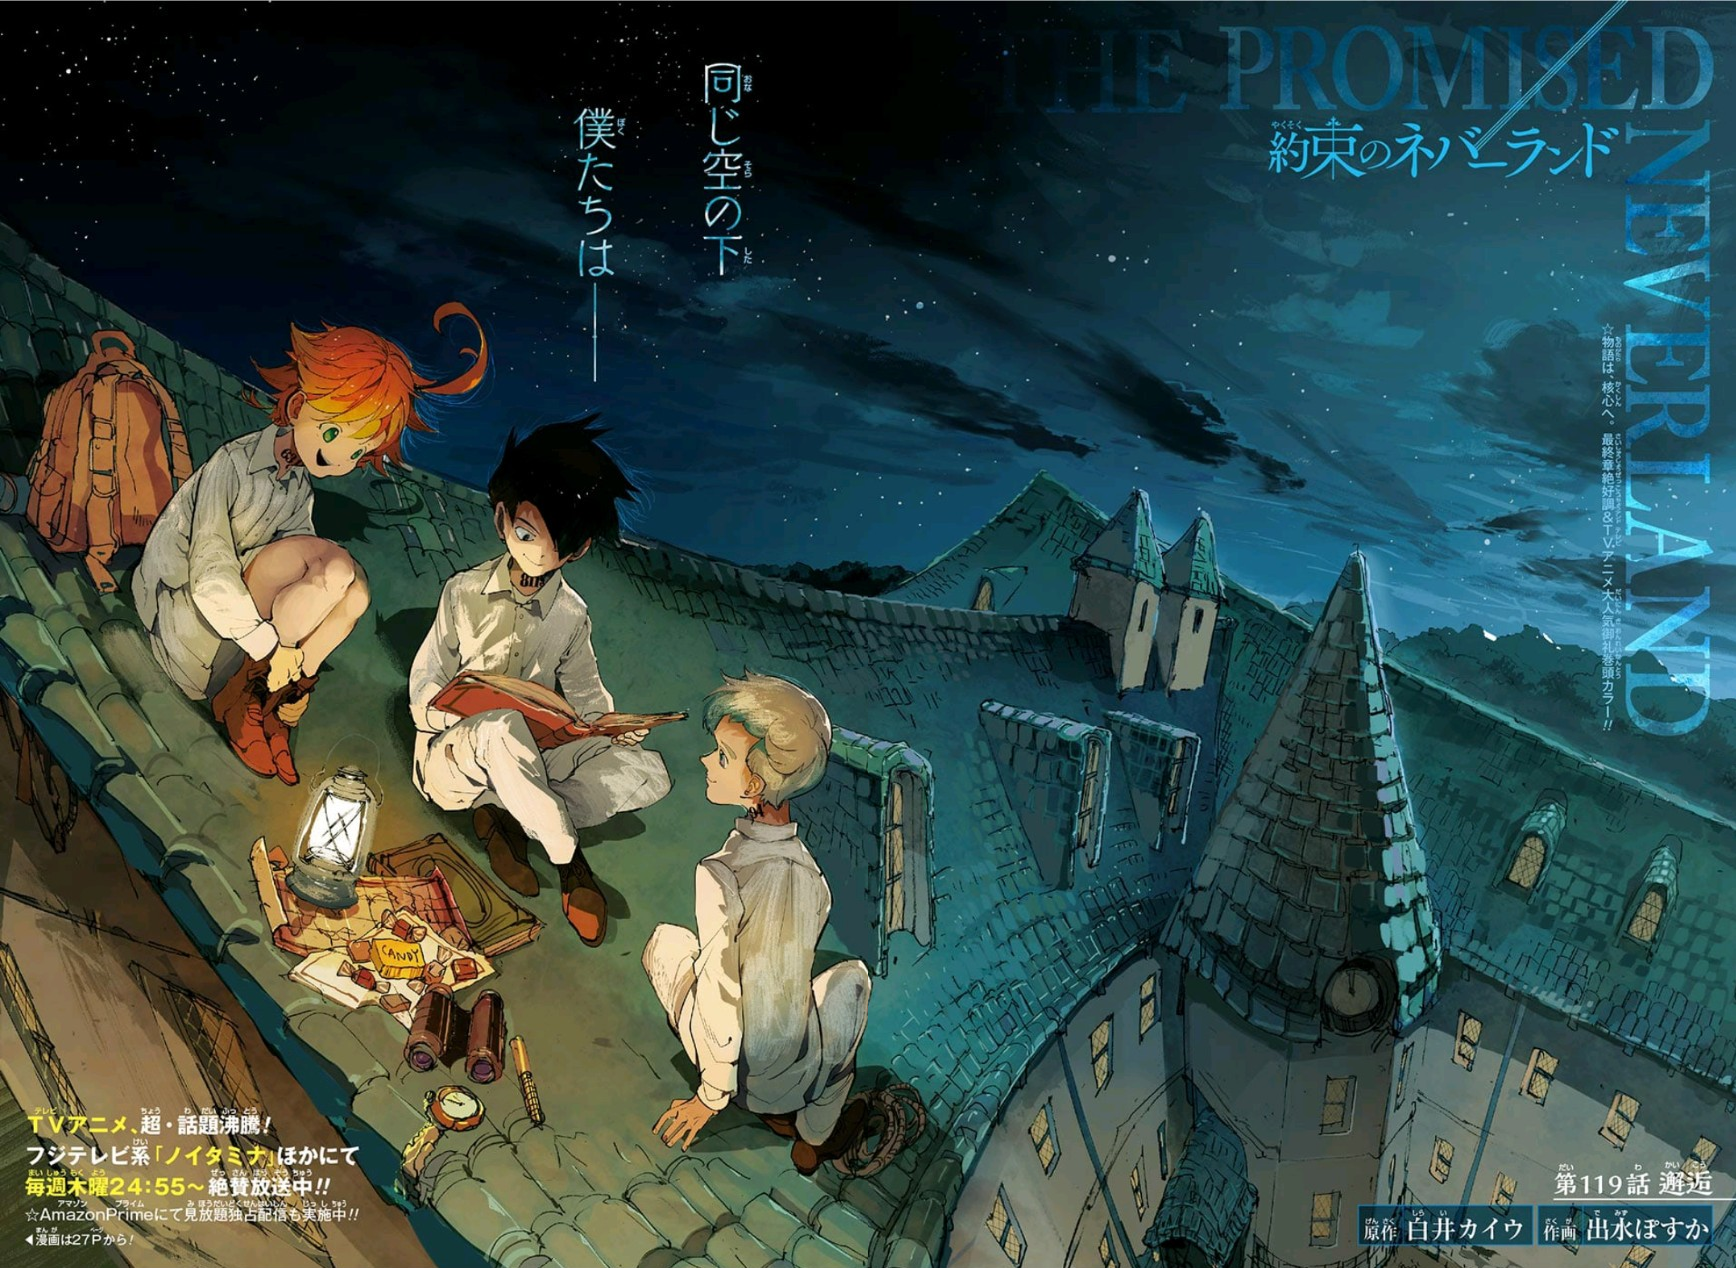 Chapter 119 The Promised Neverland Wiki Fandom